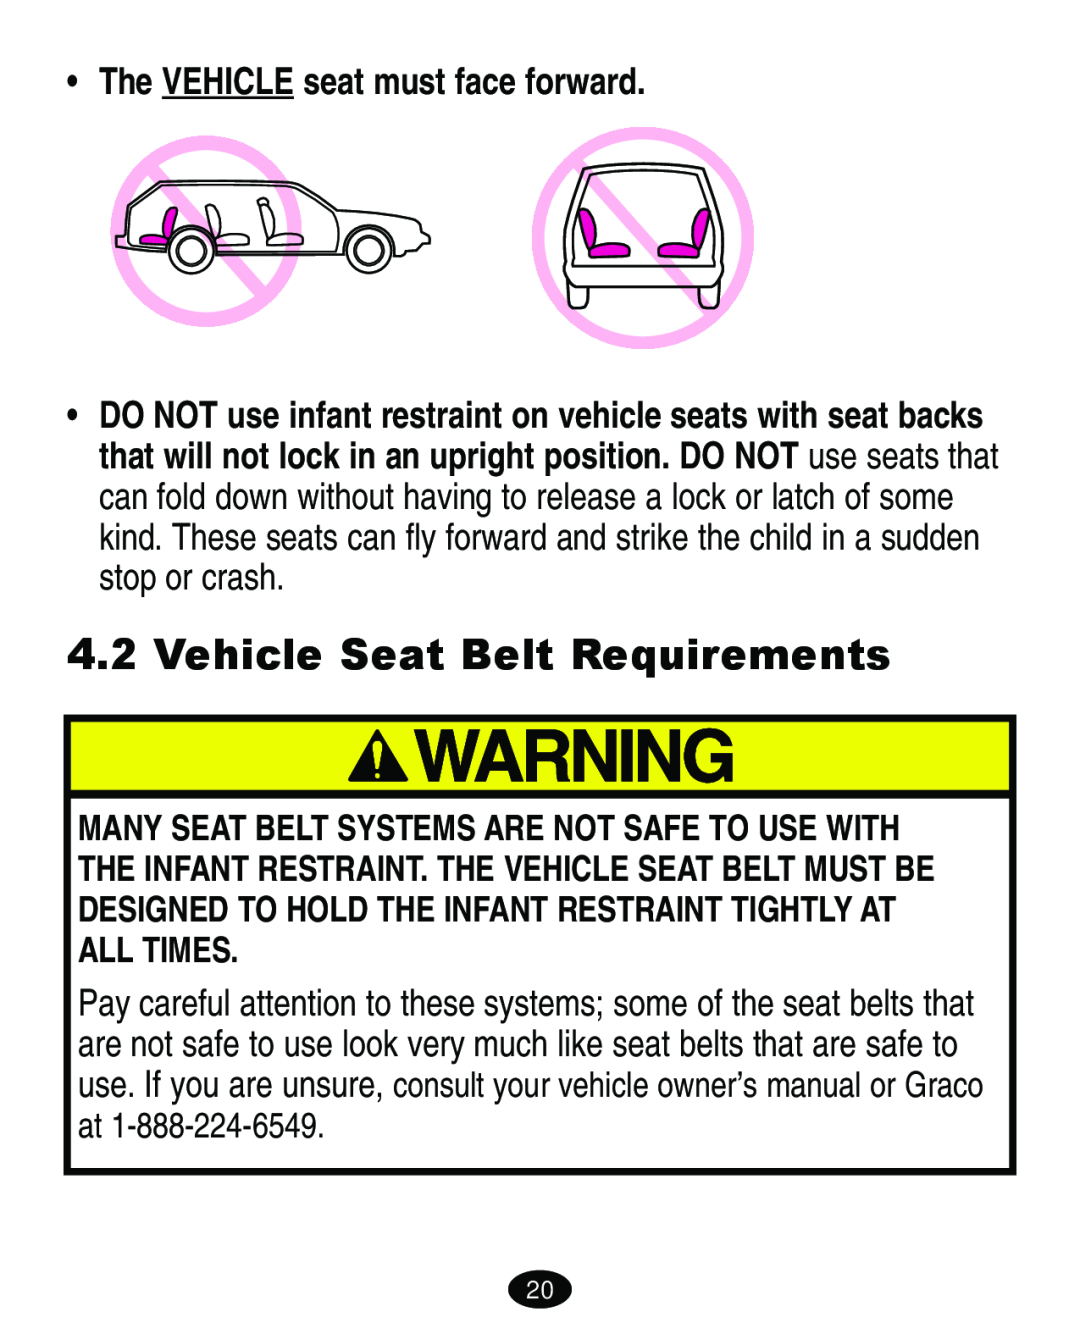 Graco 4460402 manual Vehicle Seat Belt Requirements, The VEHICLE seat must face forward 